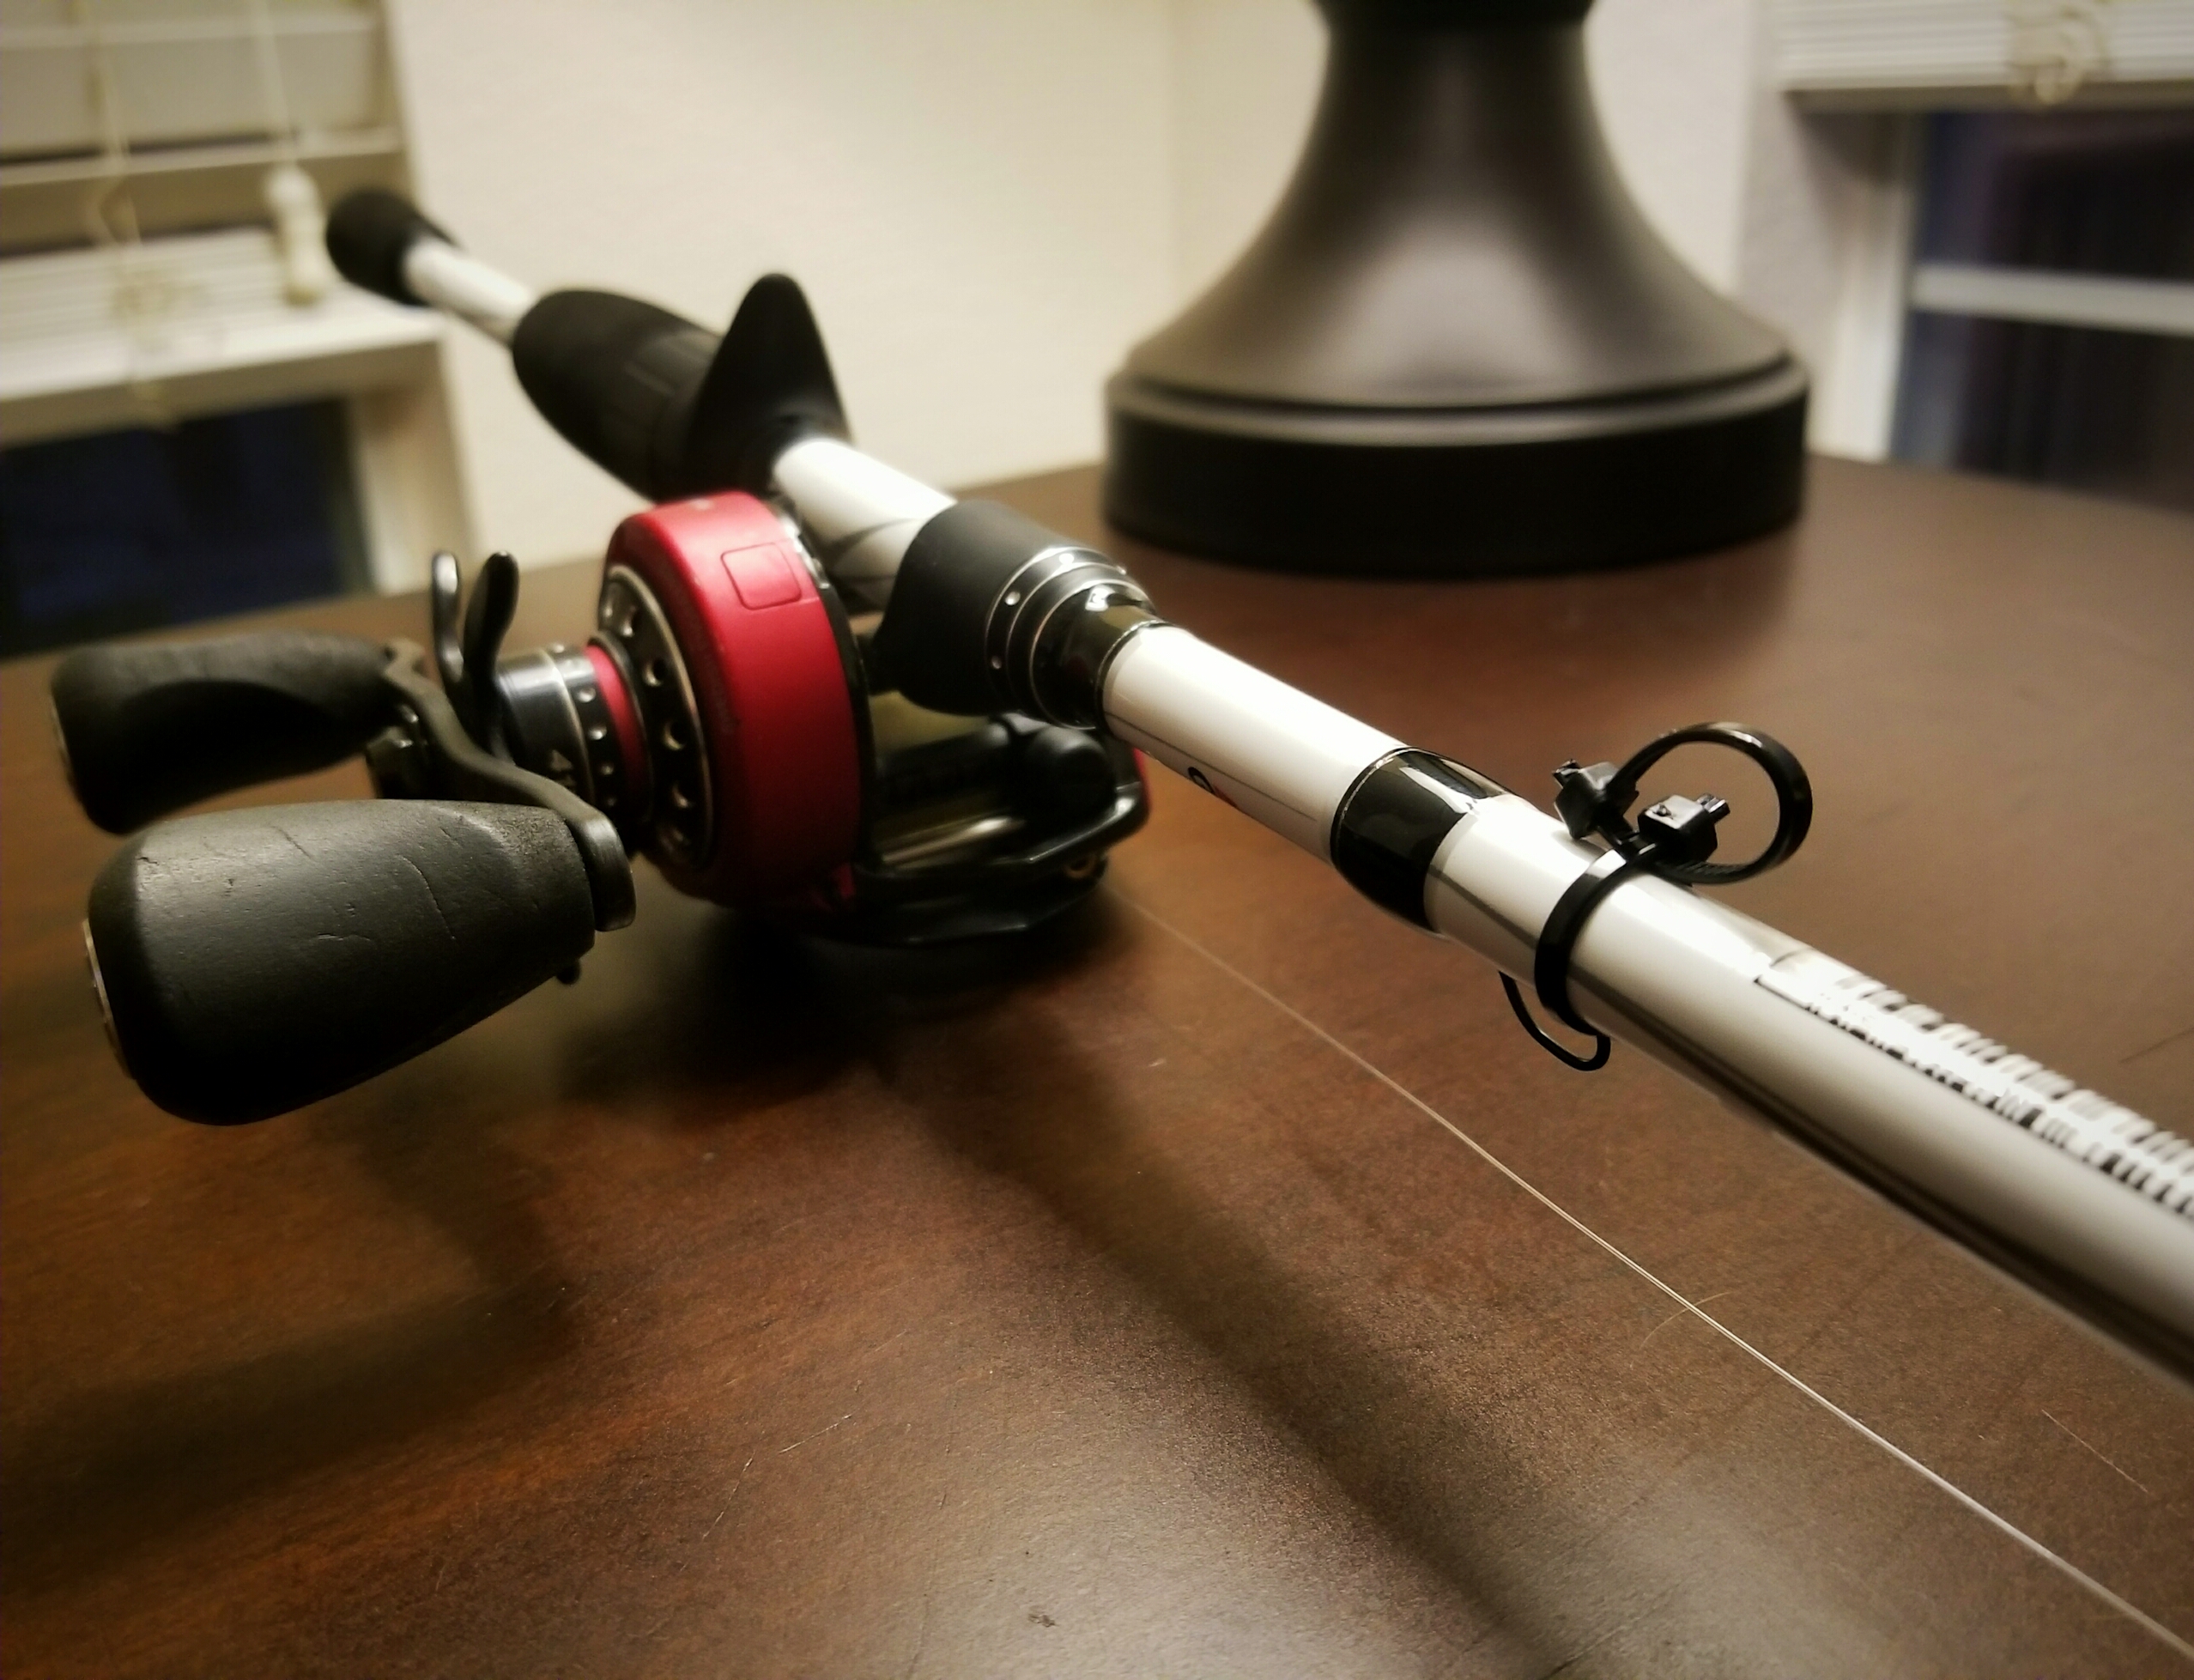 Abu Garcia rod and reel with two black zip-ties attached low on the blank